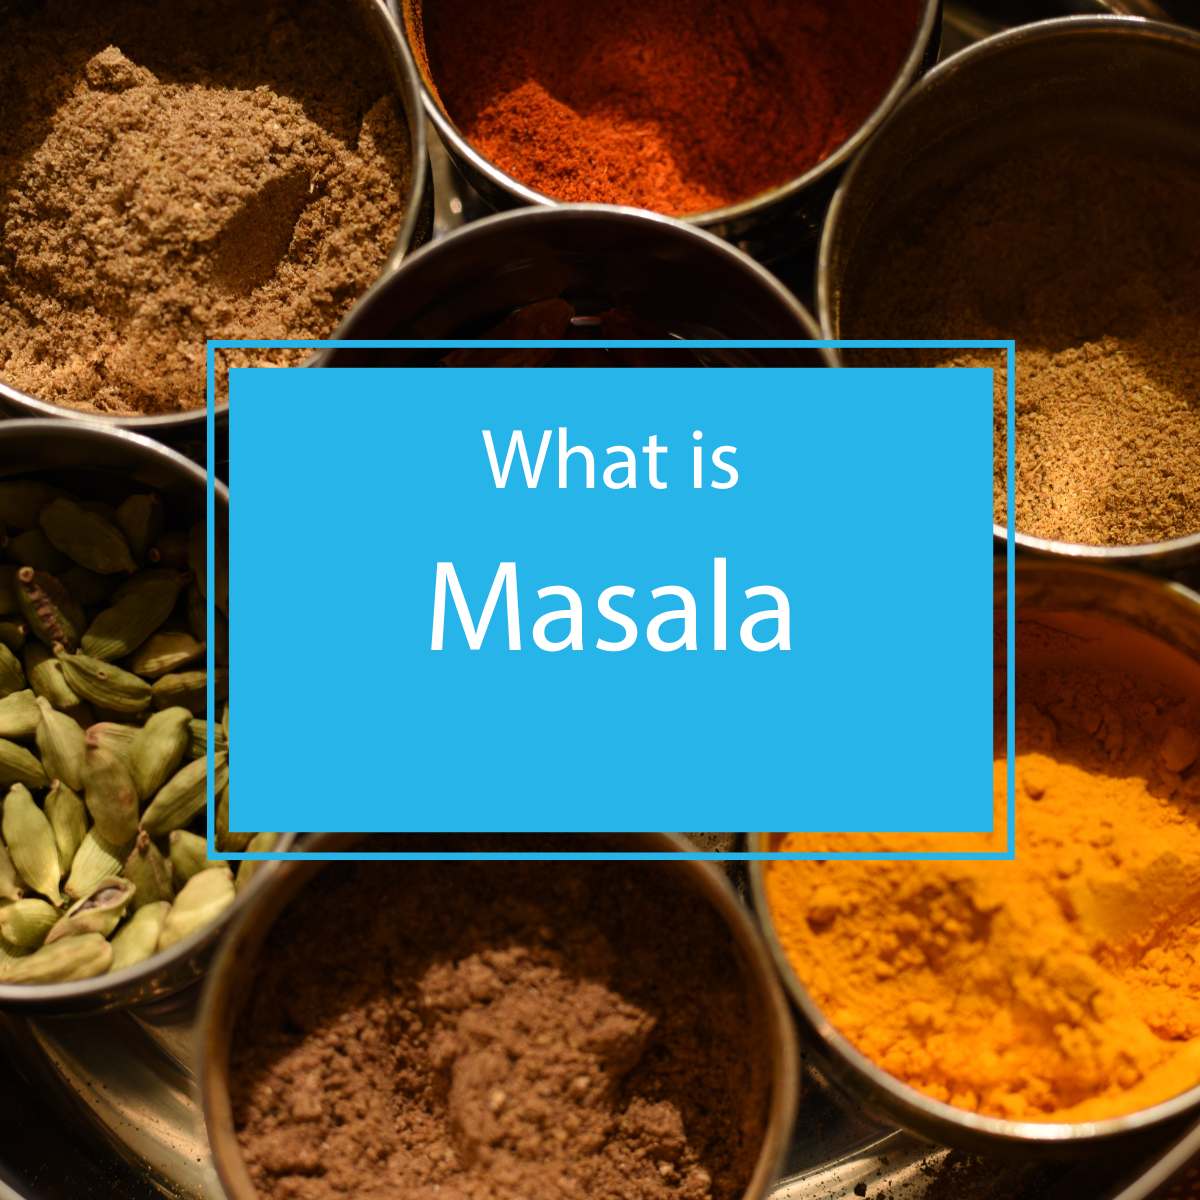 What is Masala